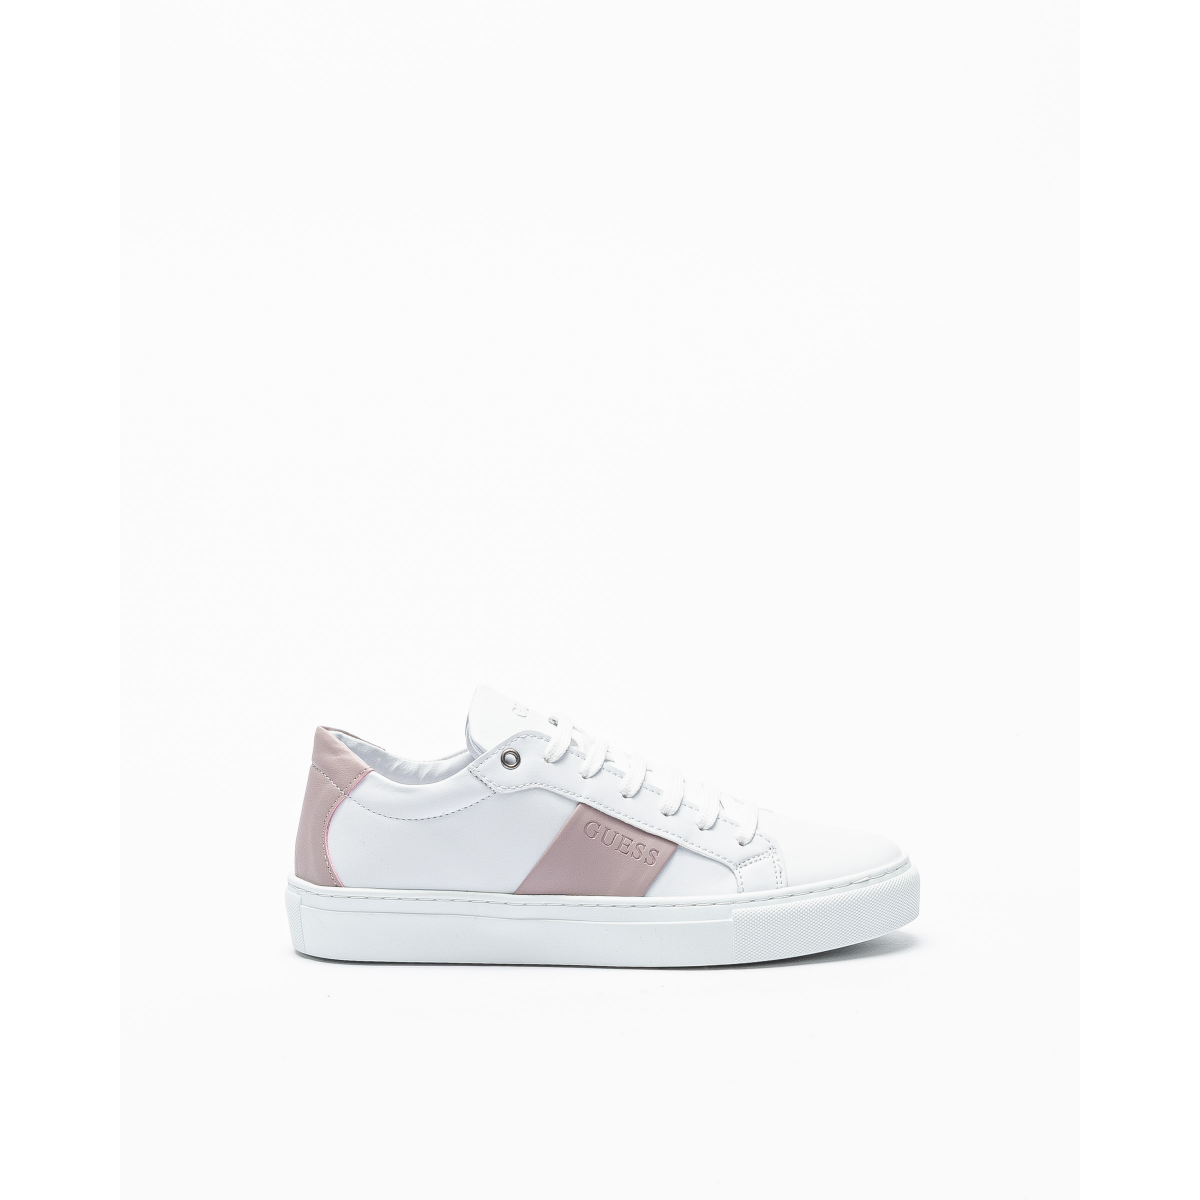 Guess Toda White White sneakers - 14-FL6TOD-50 | PROF Online Store